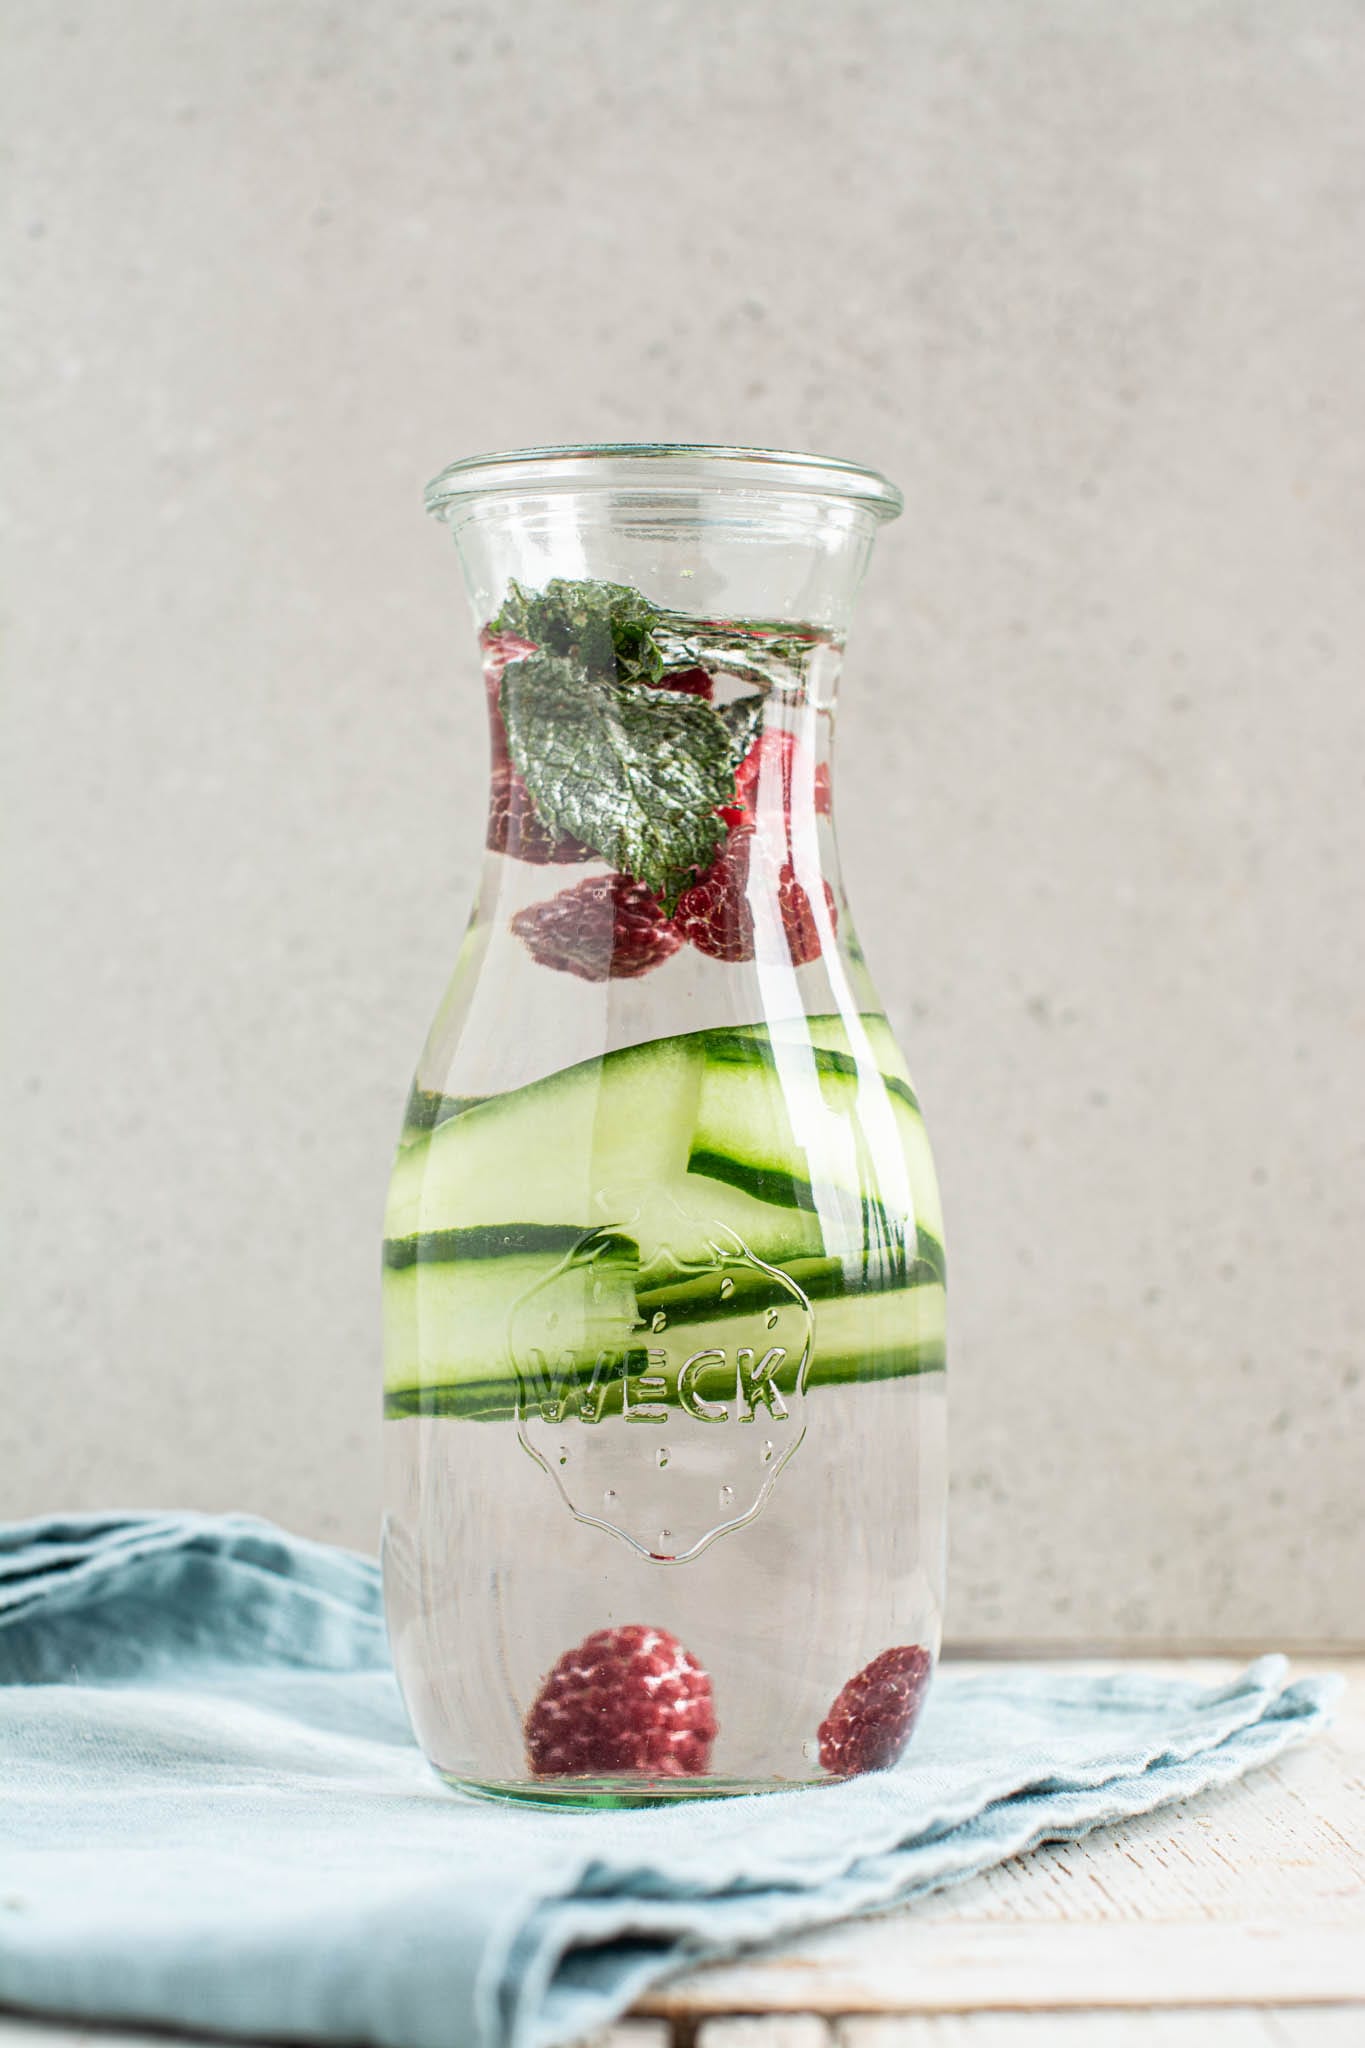 Fresh water infused with cucumber, raspberries and mint